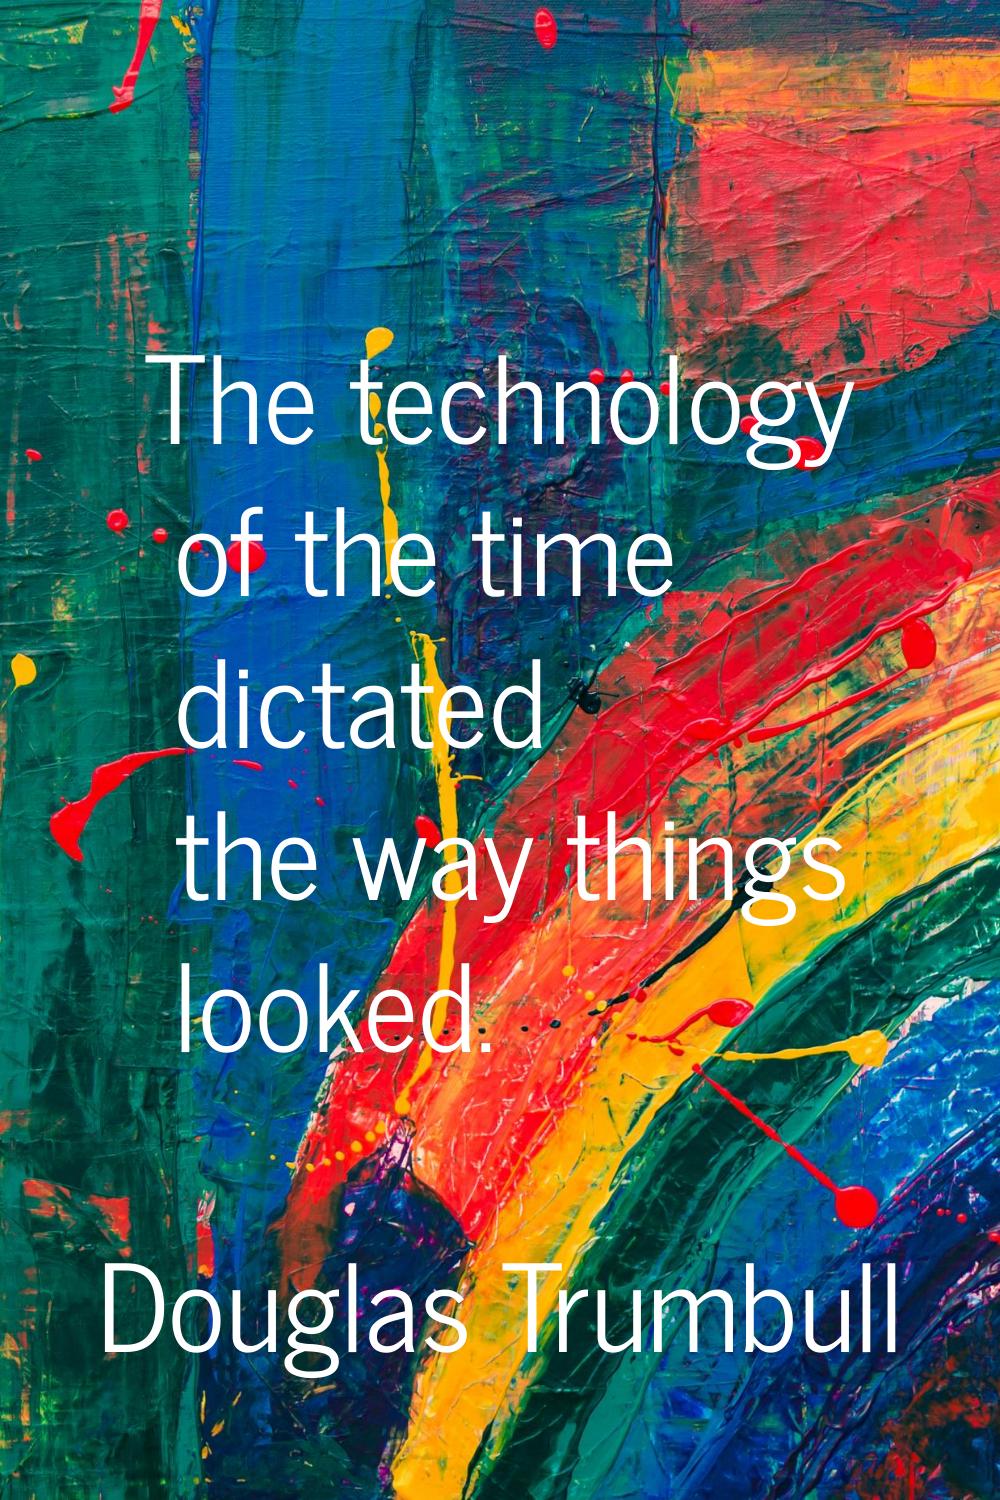 The technology of the time dictated the way things looked.